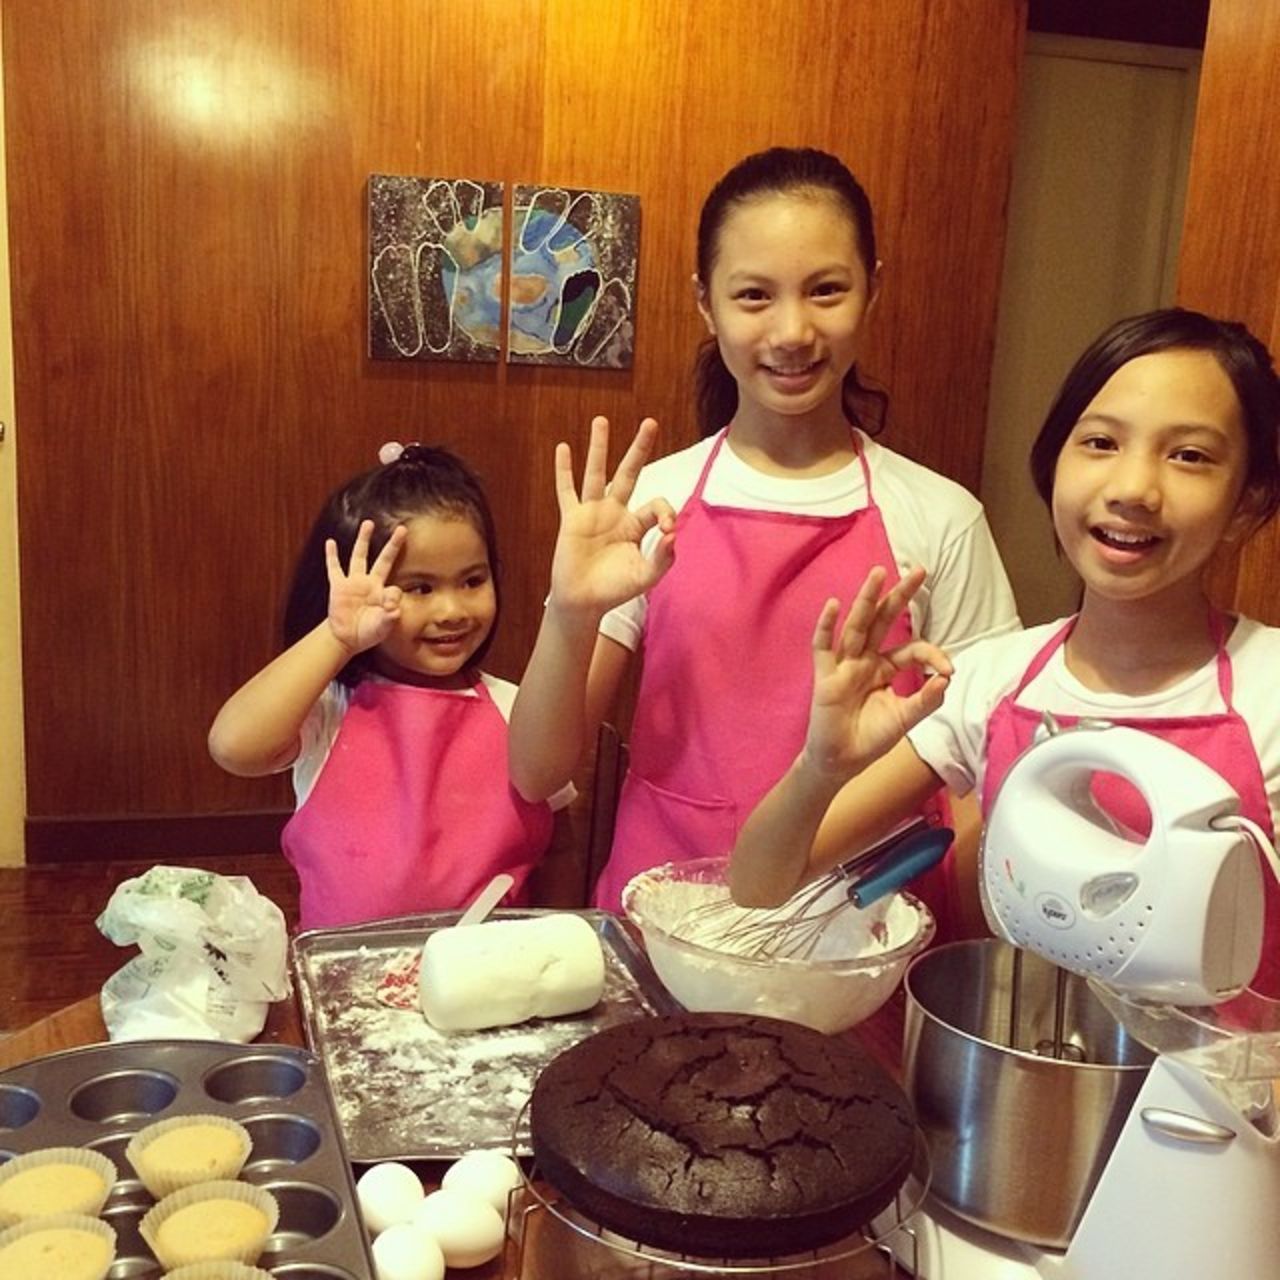 The De Armas sisters -- Leila, 13, Julia, 12, and Sophia, 3 -- started baking cupcakes in 2012 after they saw their father baking his "special cookies." They took 11 months to test the quality of their recipe, and the girls officially formed TresMarias Cupcakes this year.  